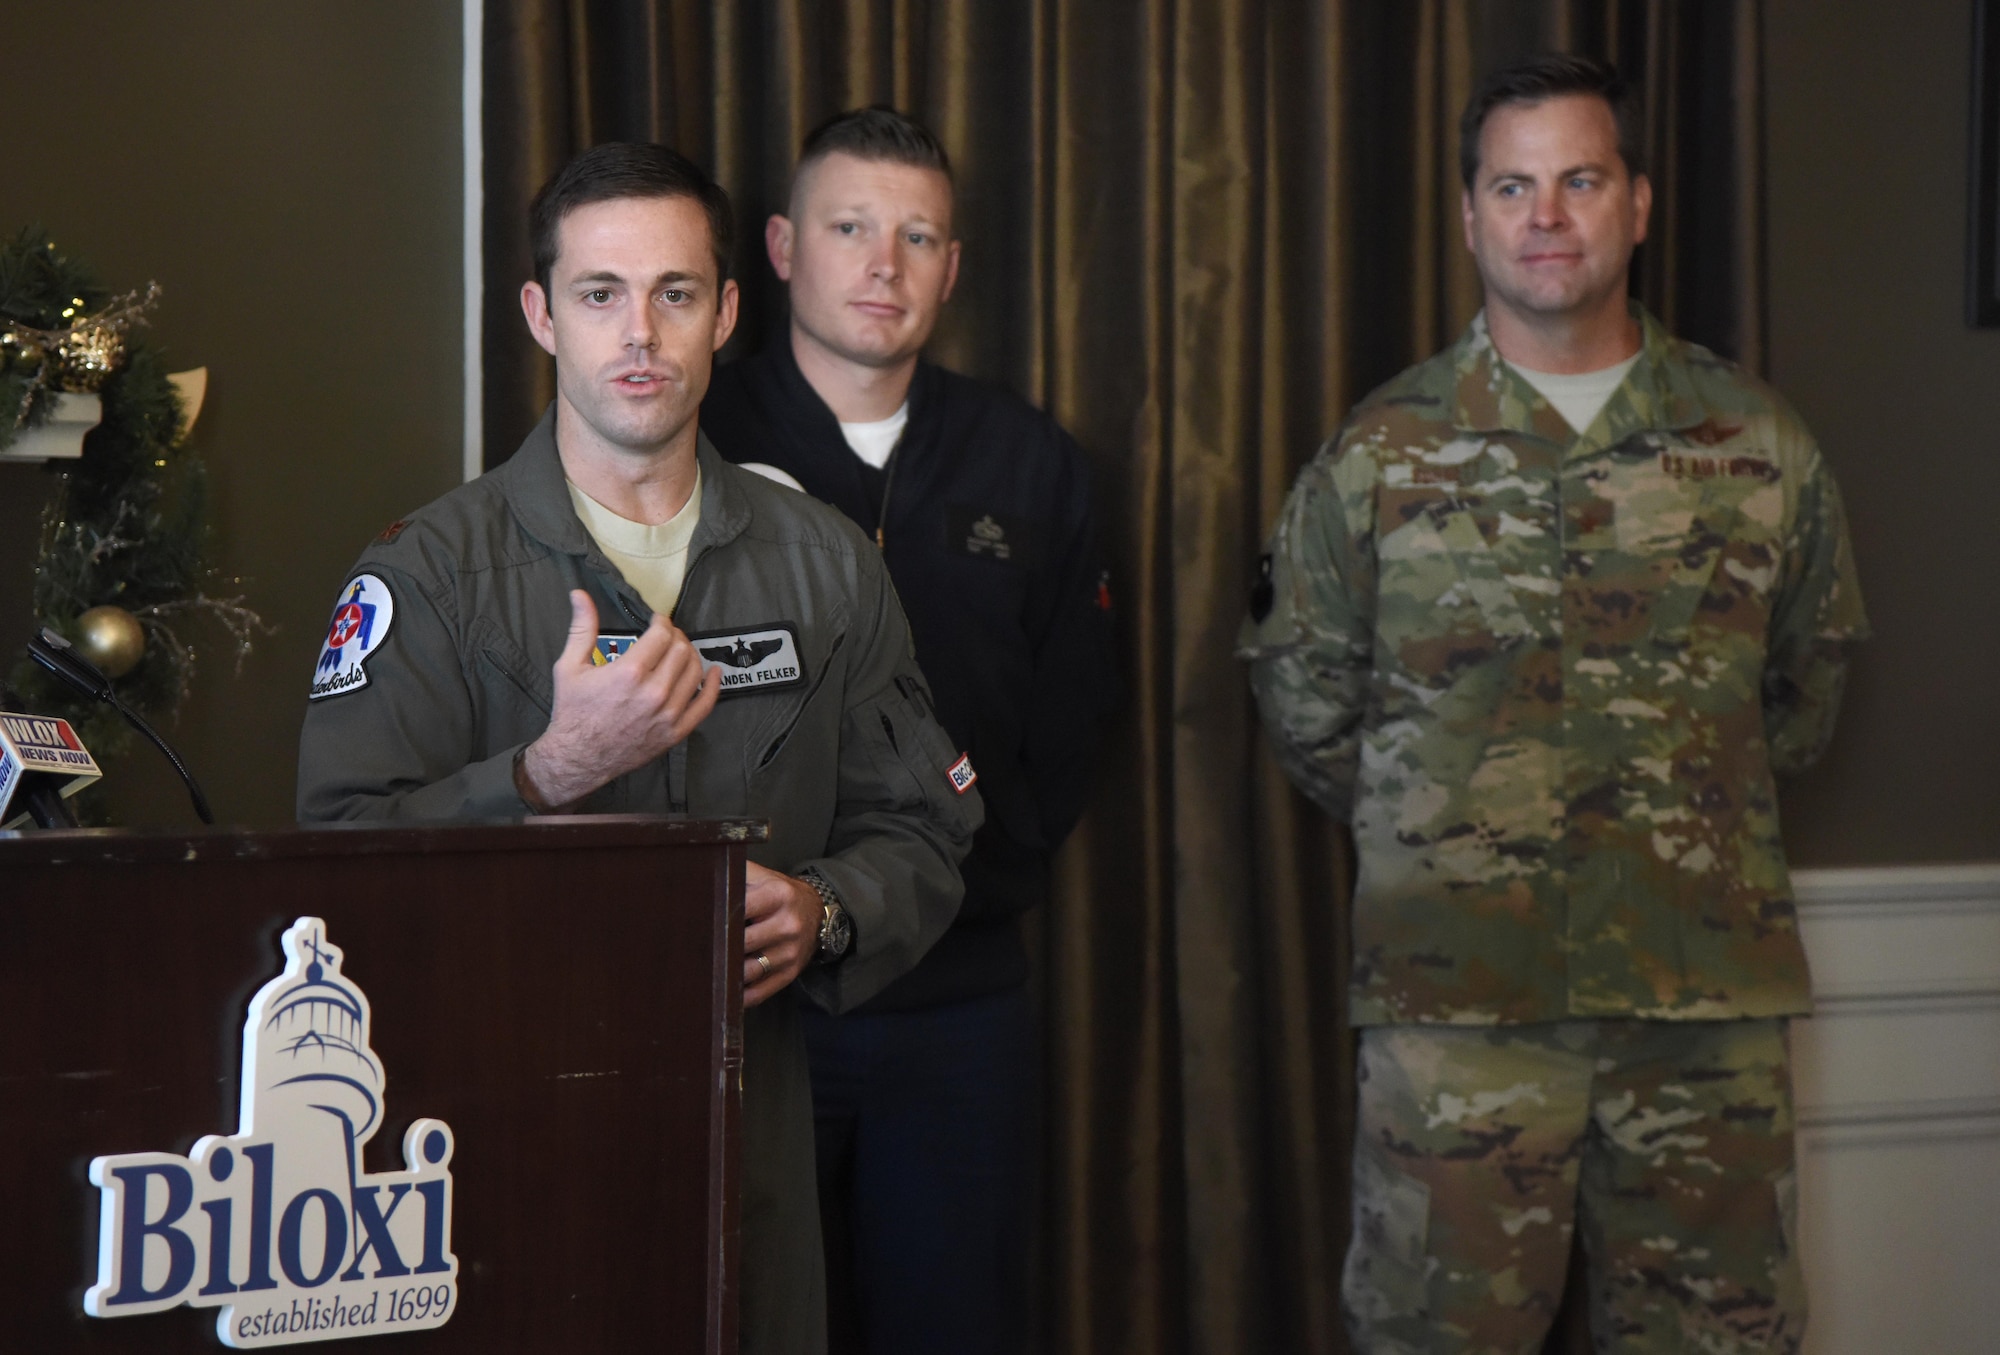 U.S. Air Force Maj. Branden "Ash" Felker, outgoing Thunderbird pilot #8, delivers remarks during a press conference formally announcing Thunder Over the Sound: The Keesler and Biloxi Air and Space Show at the Biloxi Visitors Center, in Biloxi, Mississippi, Dec. 18, 2018. Felker was joined by Keesler and Biloxi leadership at the press conference which reviewed and confirmed information and acts for the air show and allowed attendees to meet with and ask questions of all speakers. (U.S. Air Force photo by Kemberly Groue)